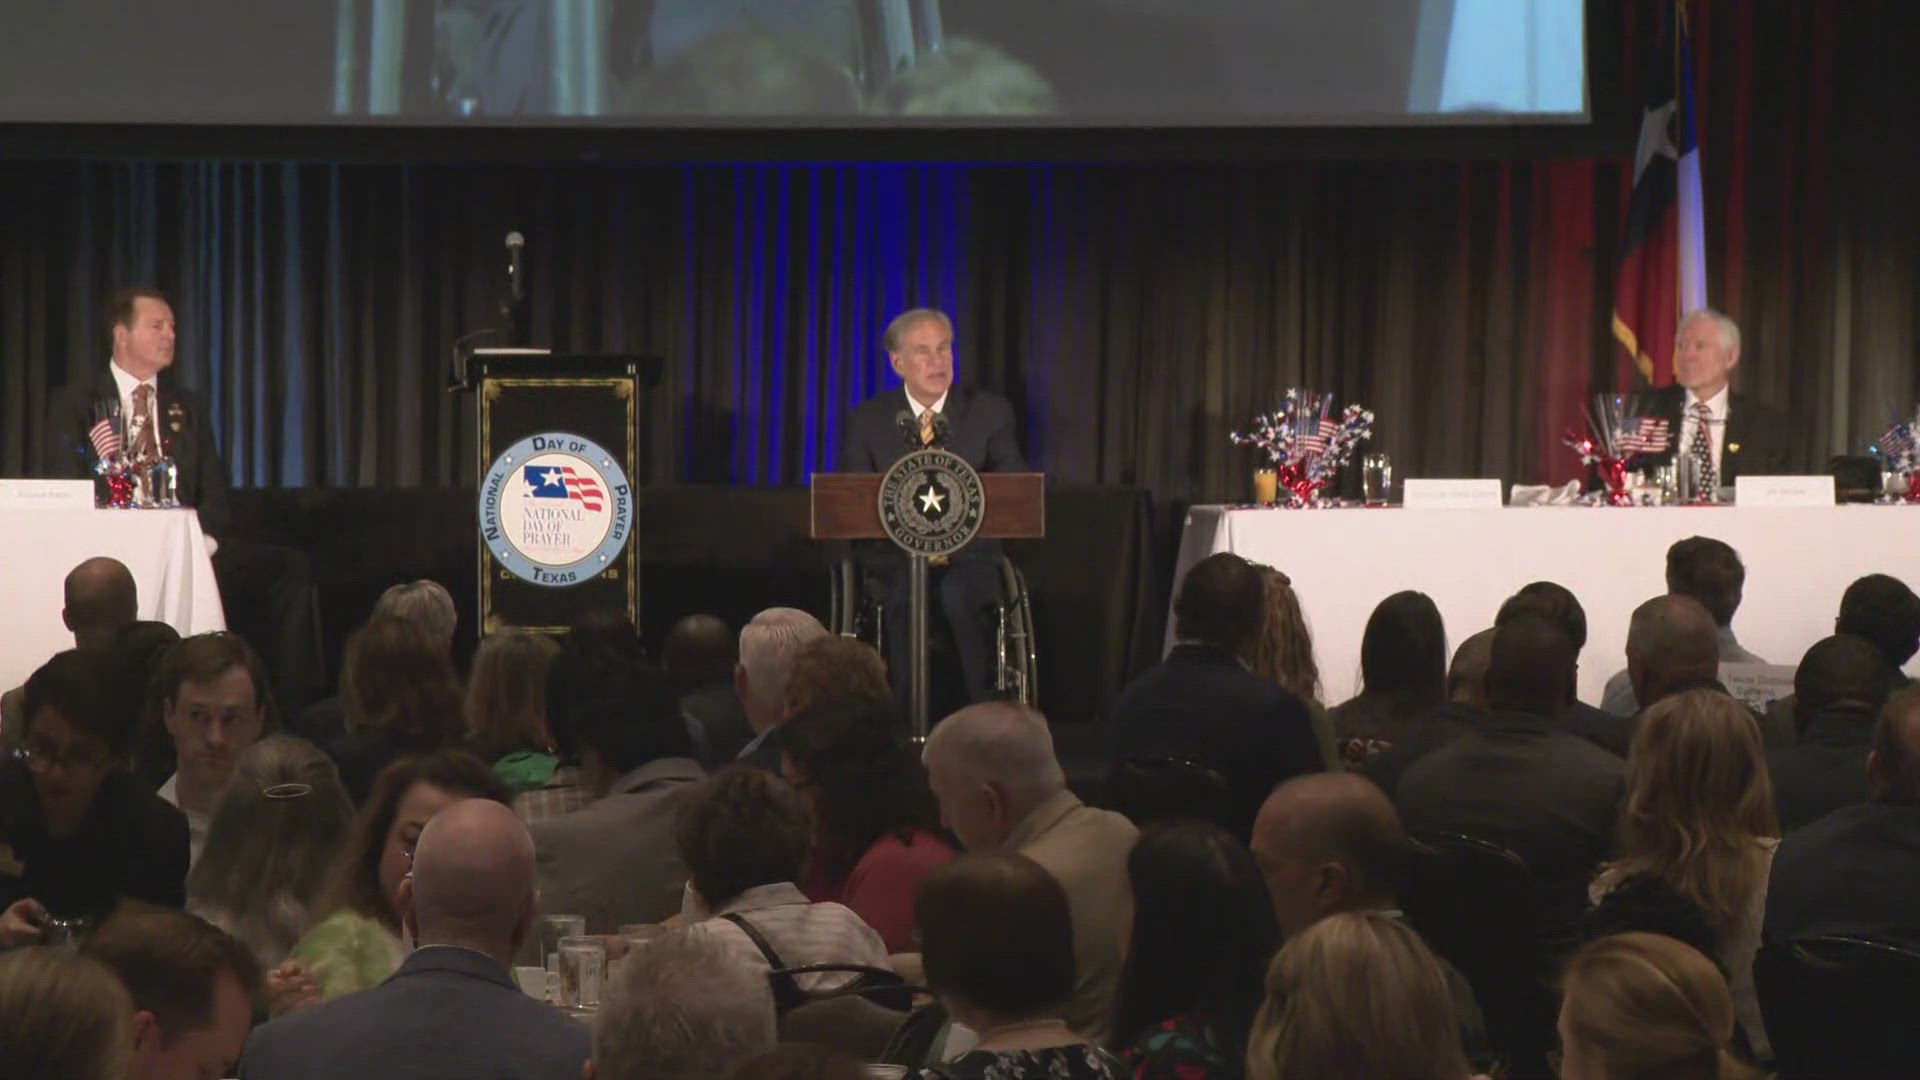 "God is with us in all circumstances," the governor said to attendees during the breakfast Monday morning in Round Rock.